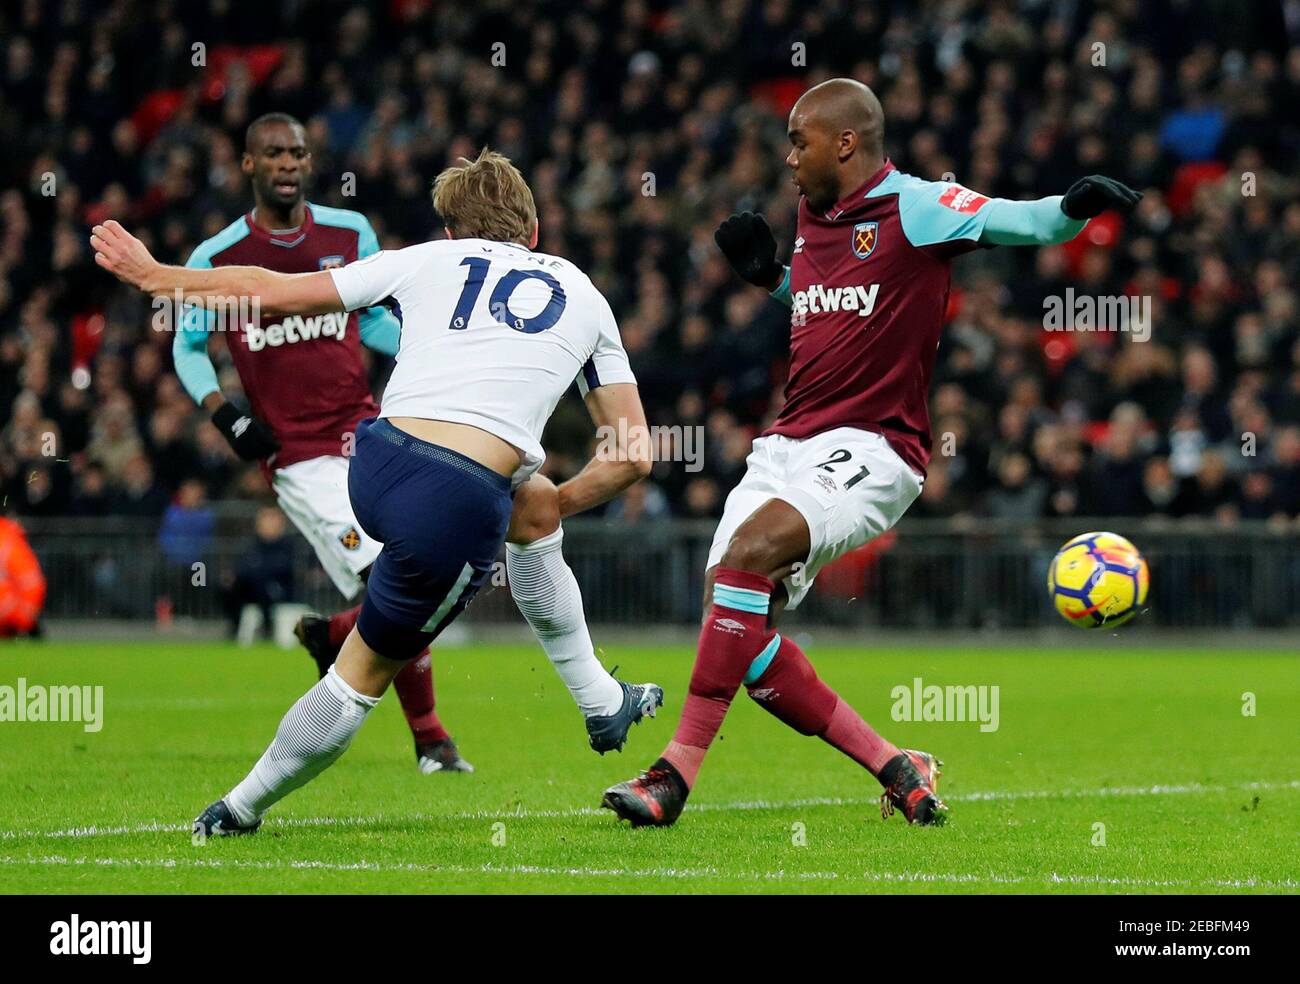 Soccer Football - Premier League - Tottenham Hotspur vs West Ham United - Wembley Stadium, London, Britain - January 4, 2018   Tottenham's Harry Kane hits the ball across goal leading to West Ham United's Winston Reid (not pictured) scoring an own goal which is later disallowed   REUTERS/Eddie Keogh    EDITORIAL USE ONLY. No use with unauthorized audio, video, data, fixture lists, club/league logos or 'live' services. Online in-match use limited to 75 images, no video emulation. No use in betting, games or single club/league/player publications.  Please contact your account representative for  Stock Photo